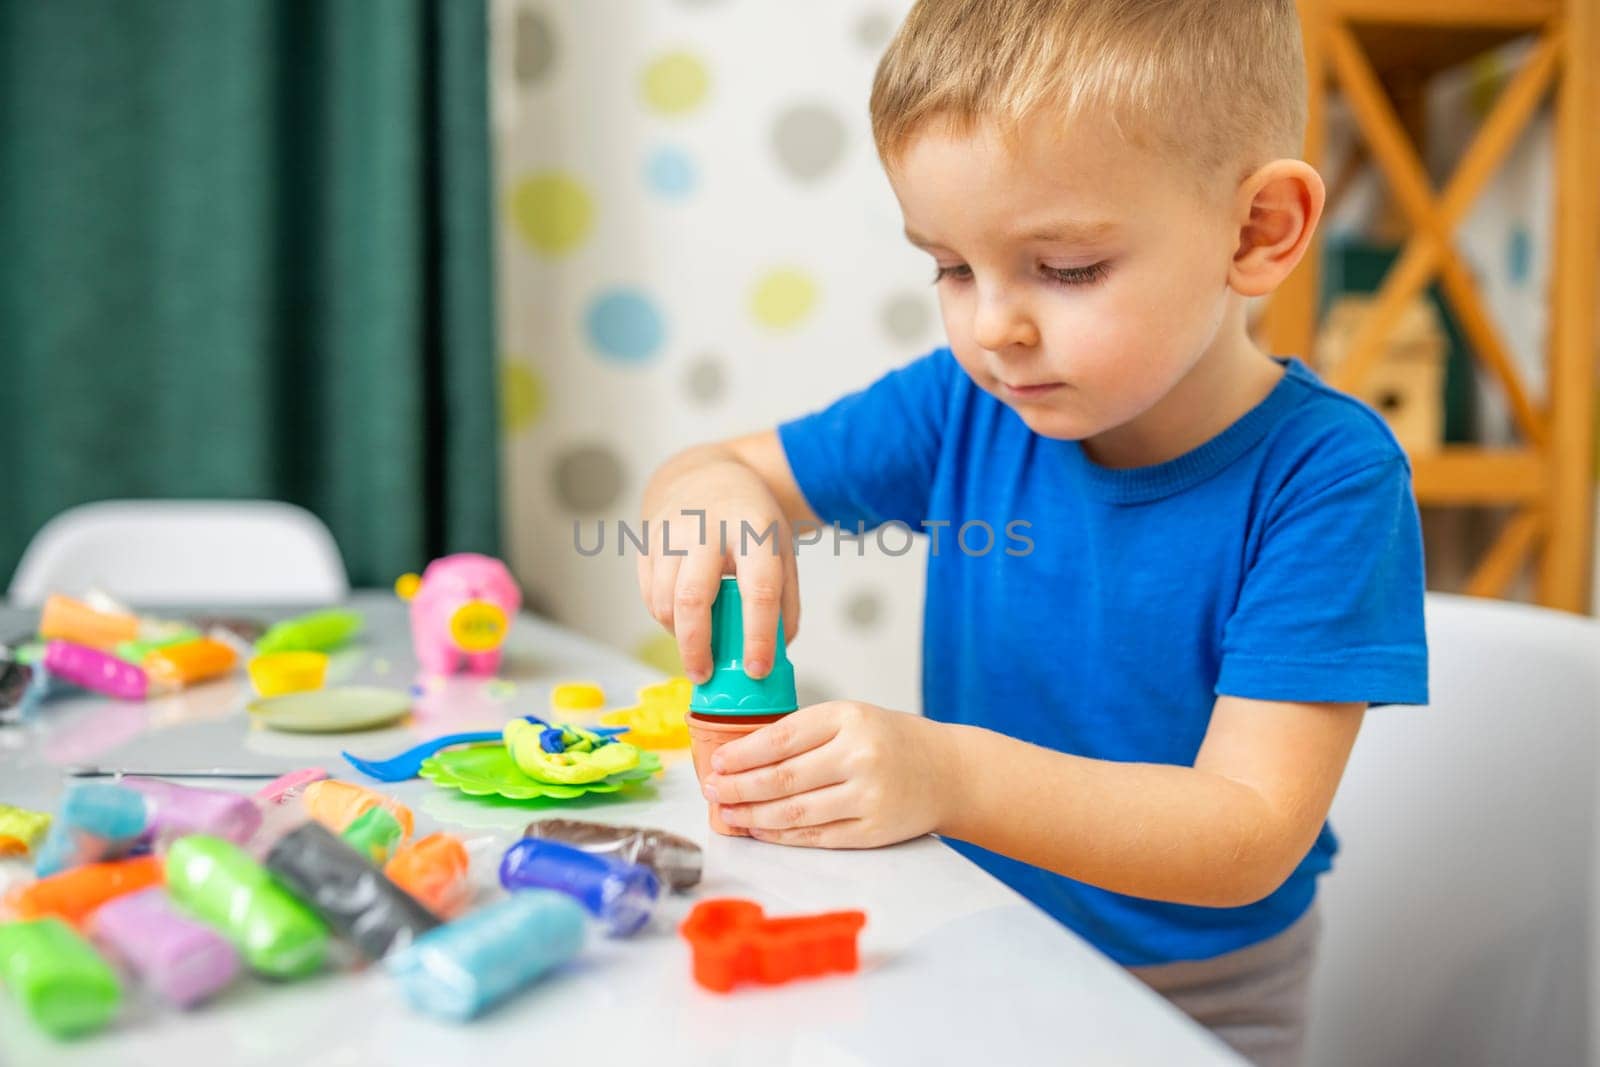 Kids playing with play dough. Cute children sitting at the table and plays with playdough. Creative leisure activity concept